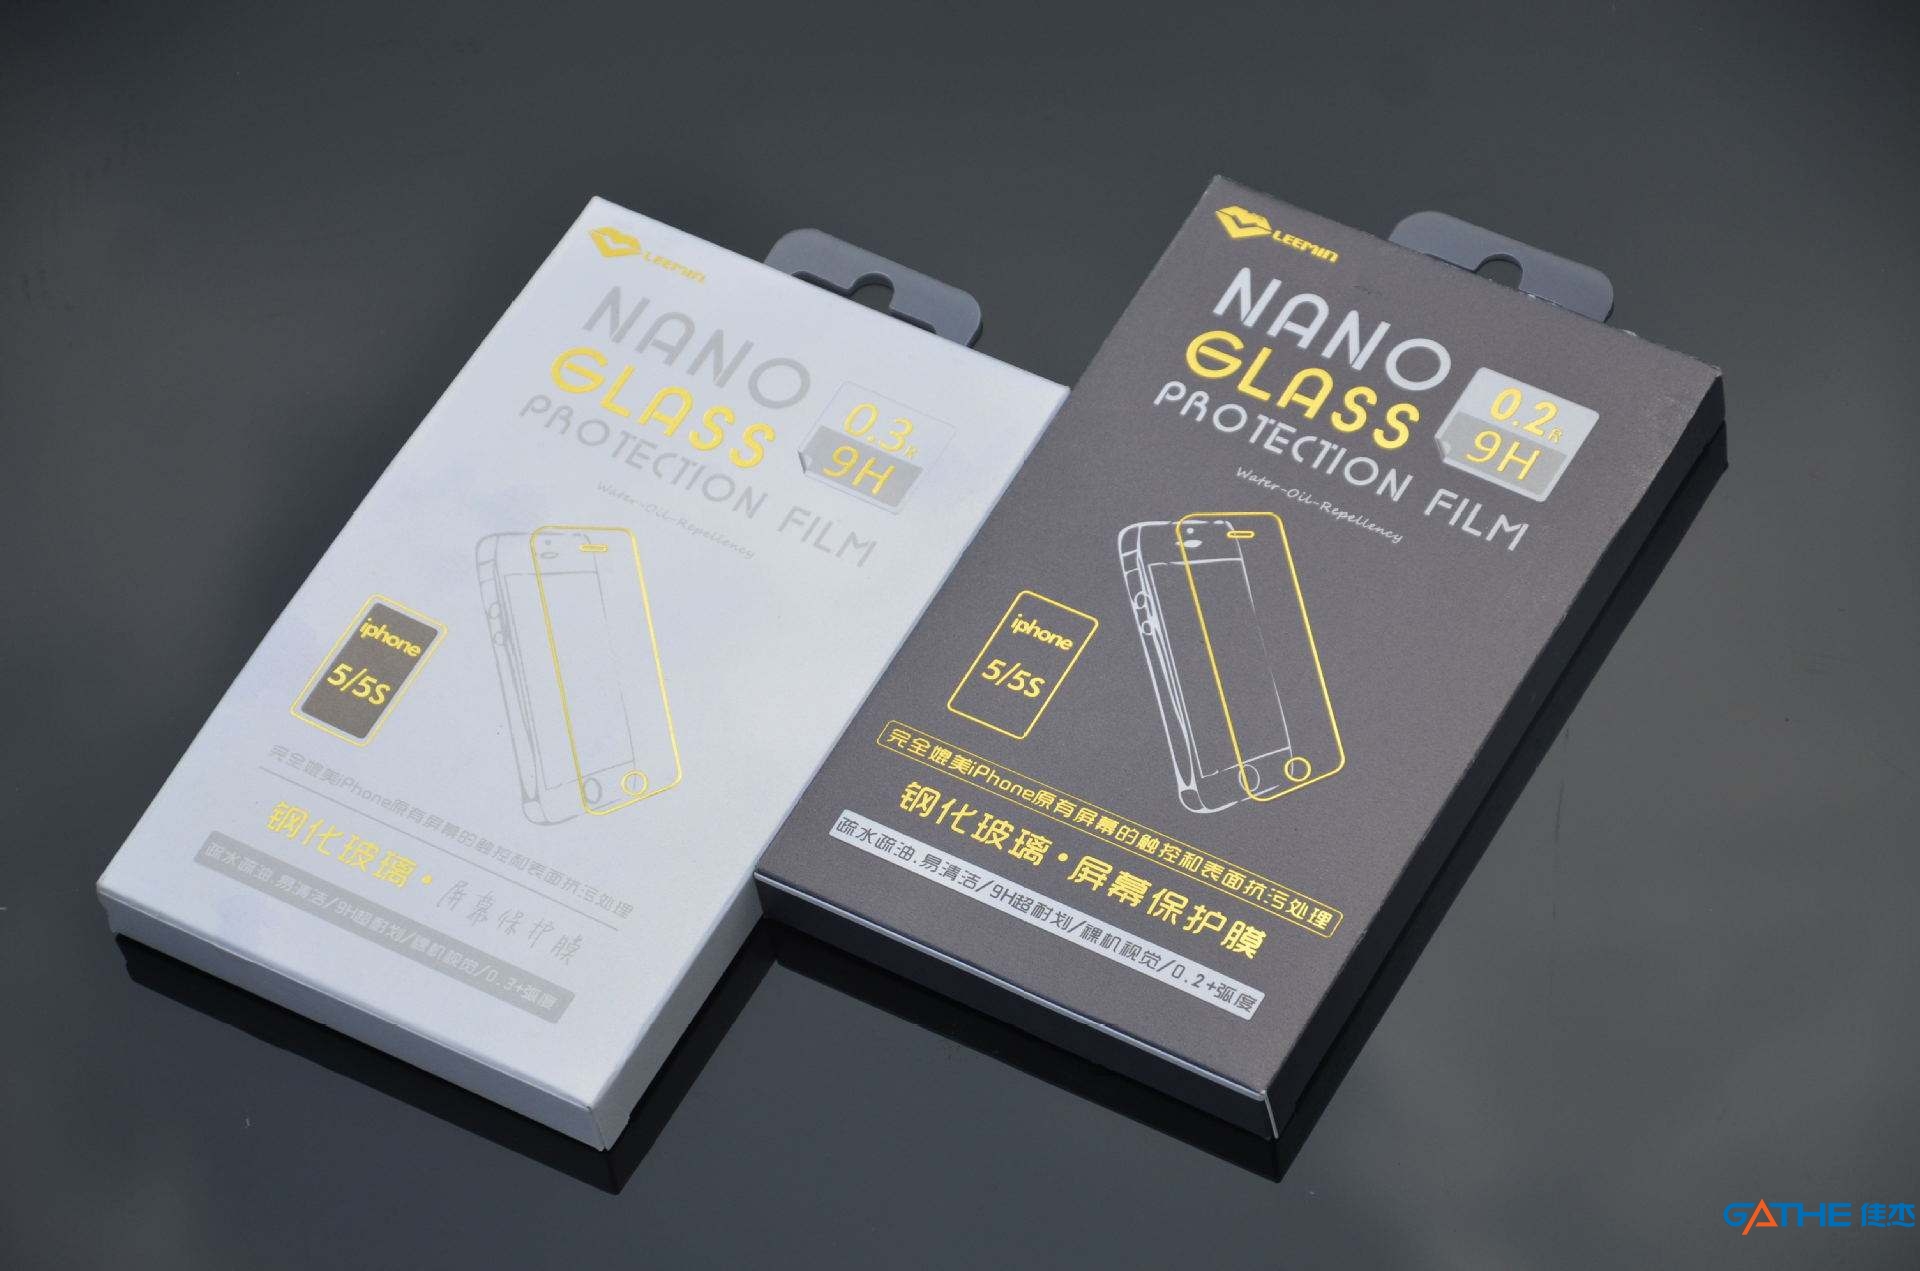 What details shoued be care in designing customization of screen protector box? 